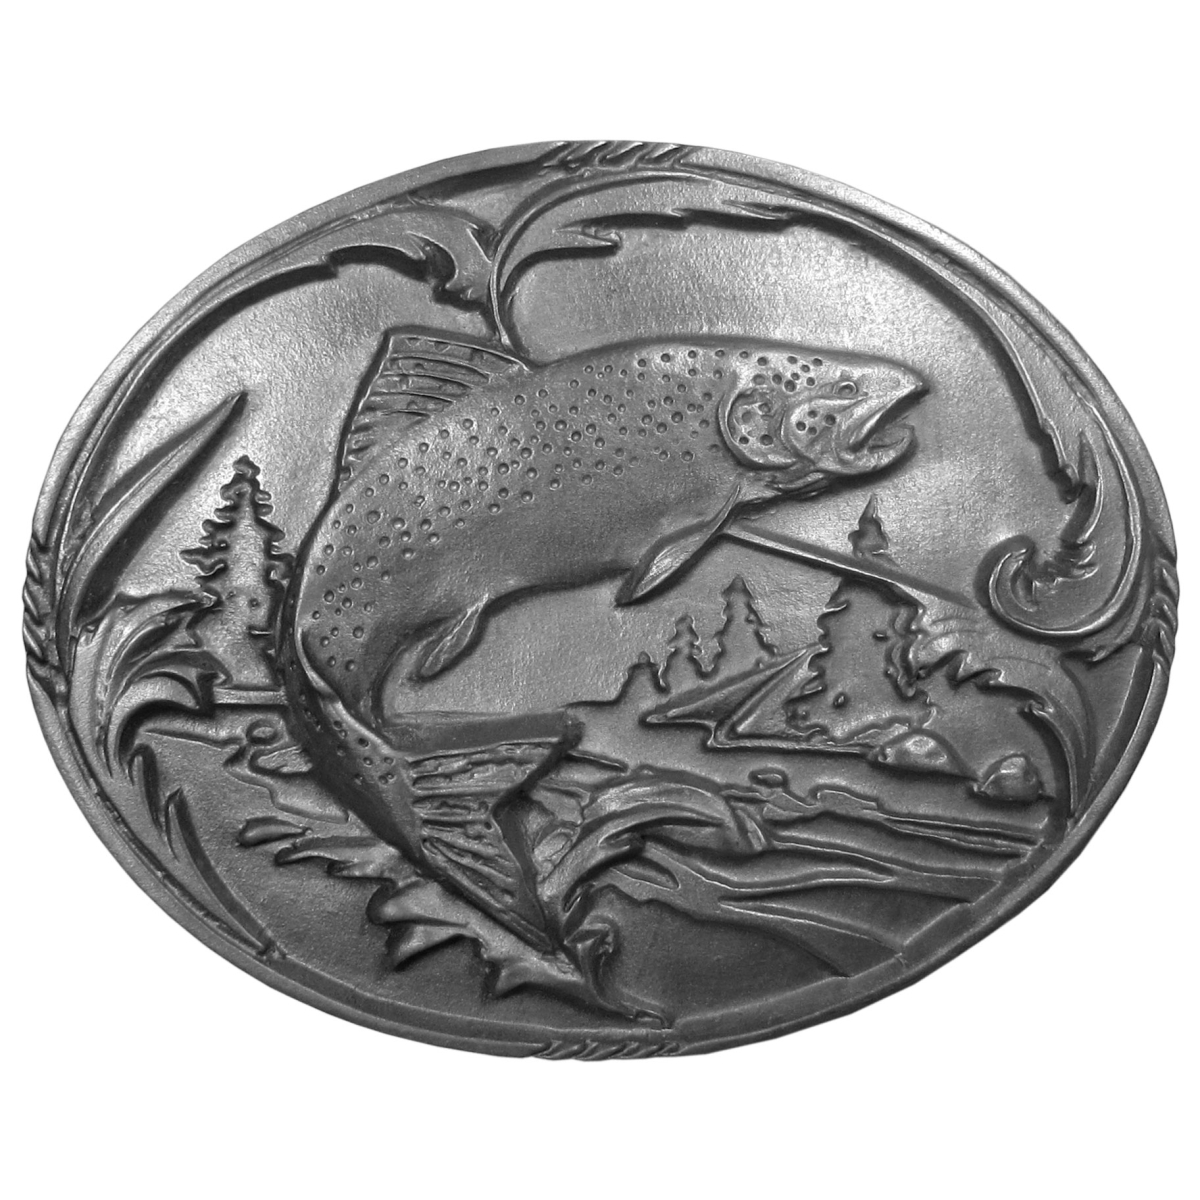 Picture of Siskiyou X3 Fish & Stream Antiqued Belt Buckle